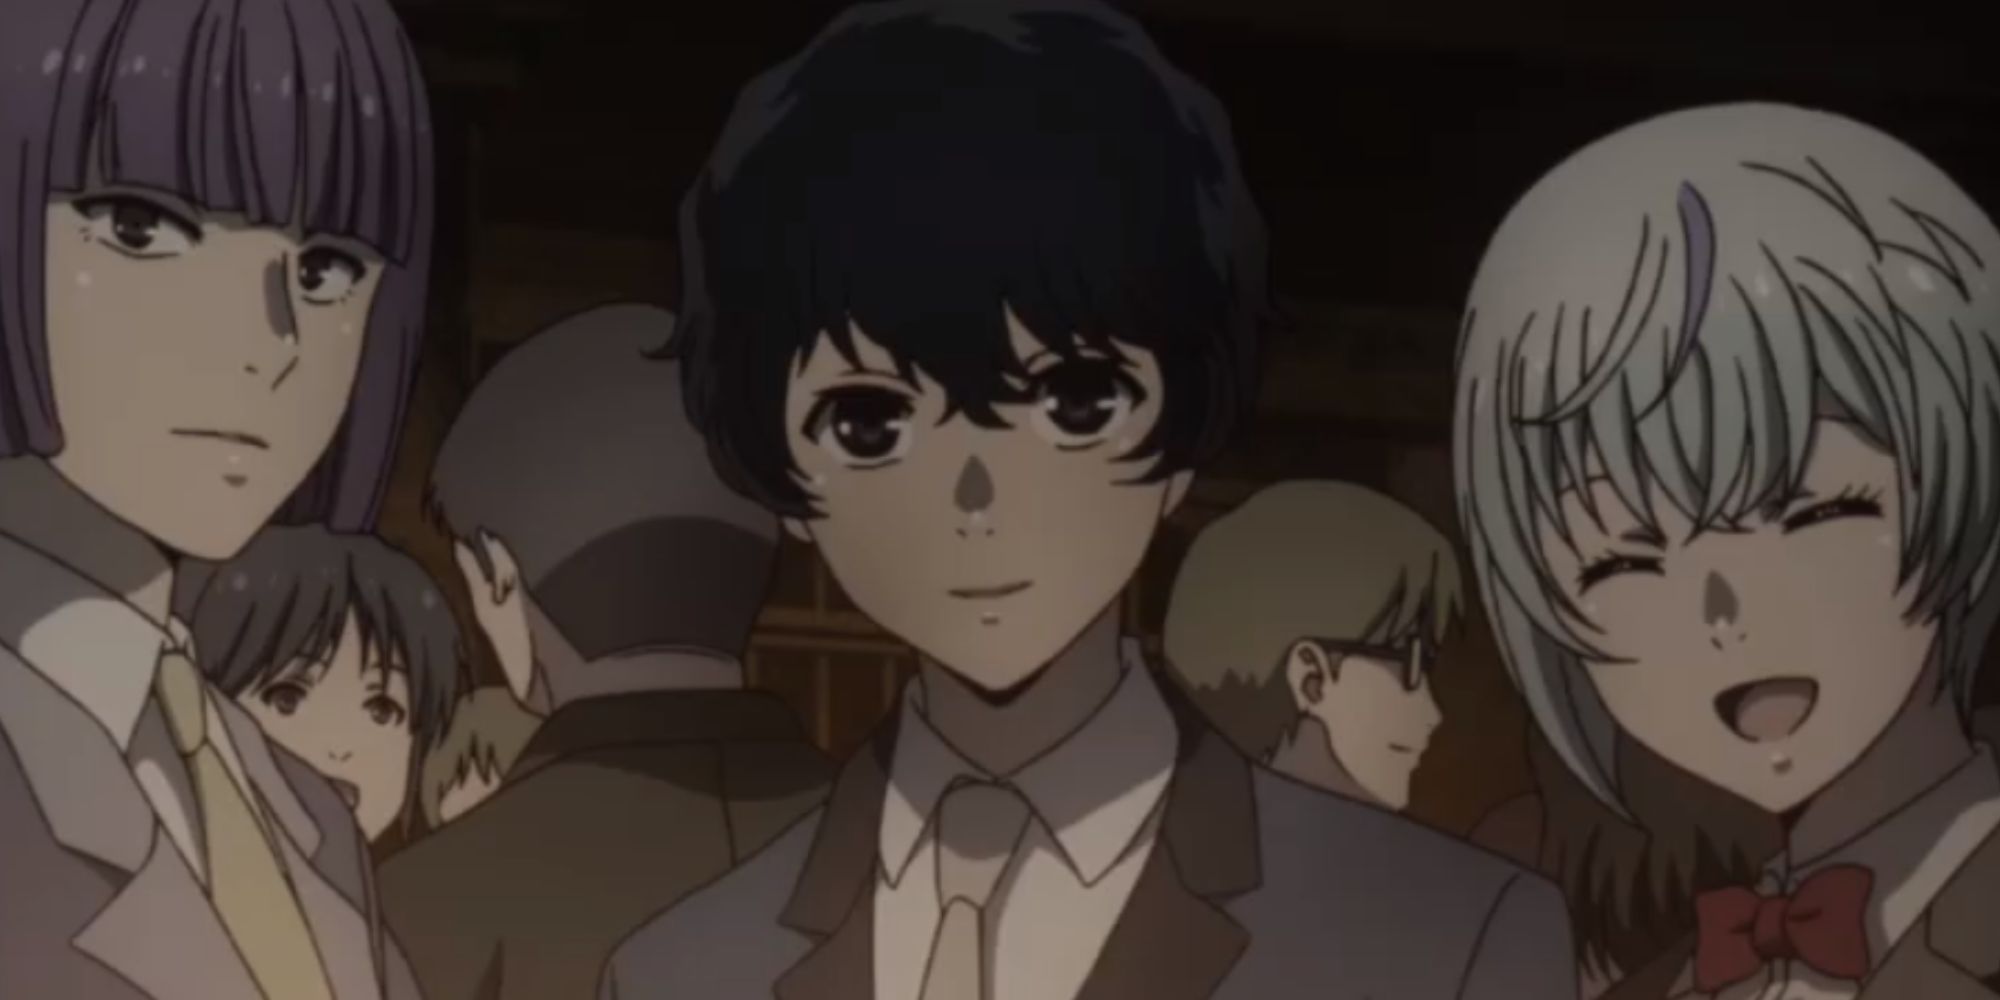 Yusa Arima, standing in the center with two of his friends on either side of him in Tokyo Ghoul.